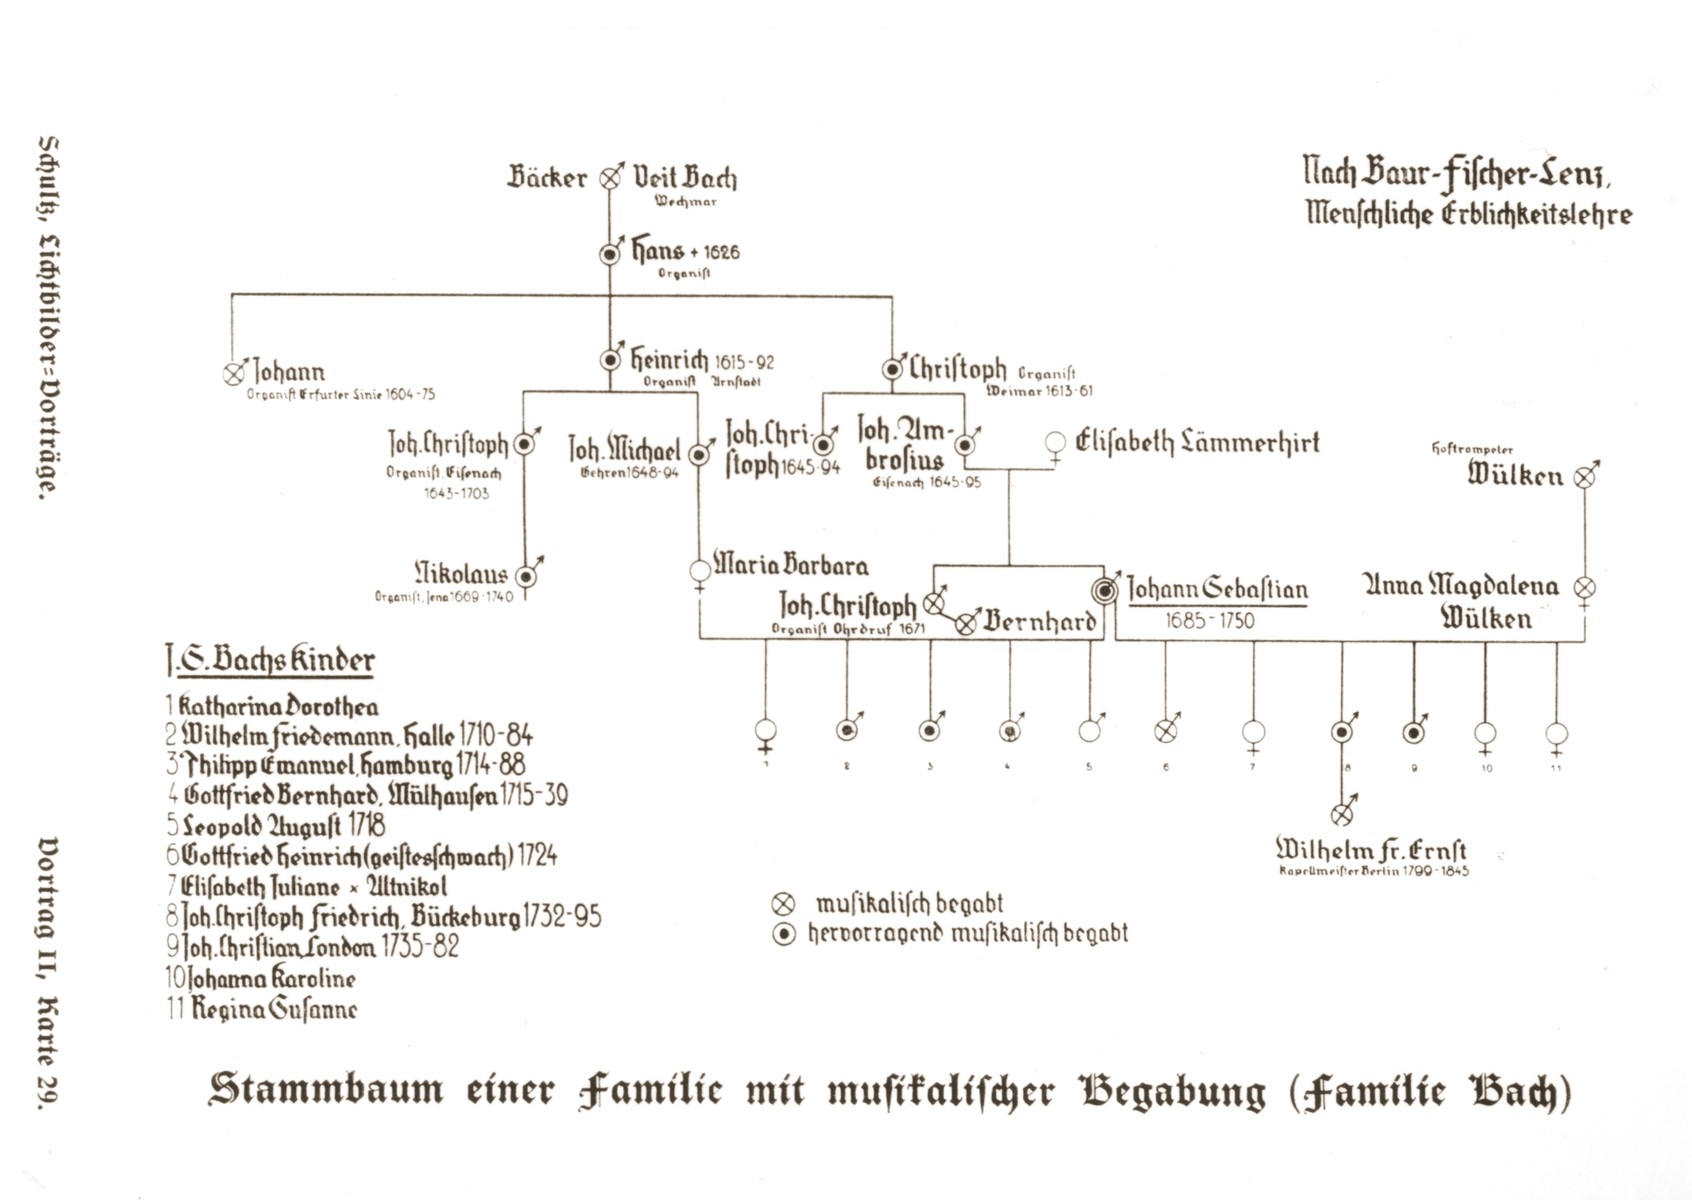 Family tree illustrating the transmission of musical genius through several generations of the family of Johann Sebastian Bach, taken from a set of slides produced to illustrate a lecture by Dr. Johannes Schottky, researcher in the SS Race and Settlement Office, on human heredity, with special attention to physical and mental disabilities. [Lecture 2, Card 29]